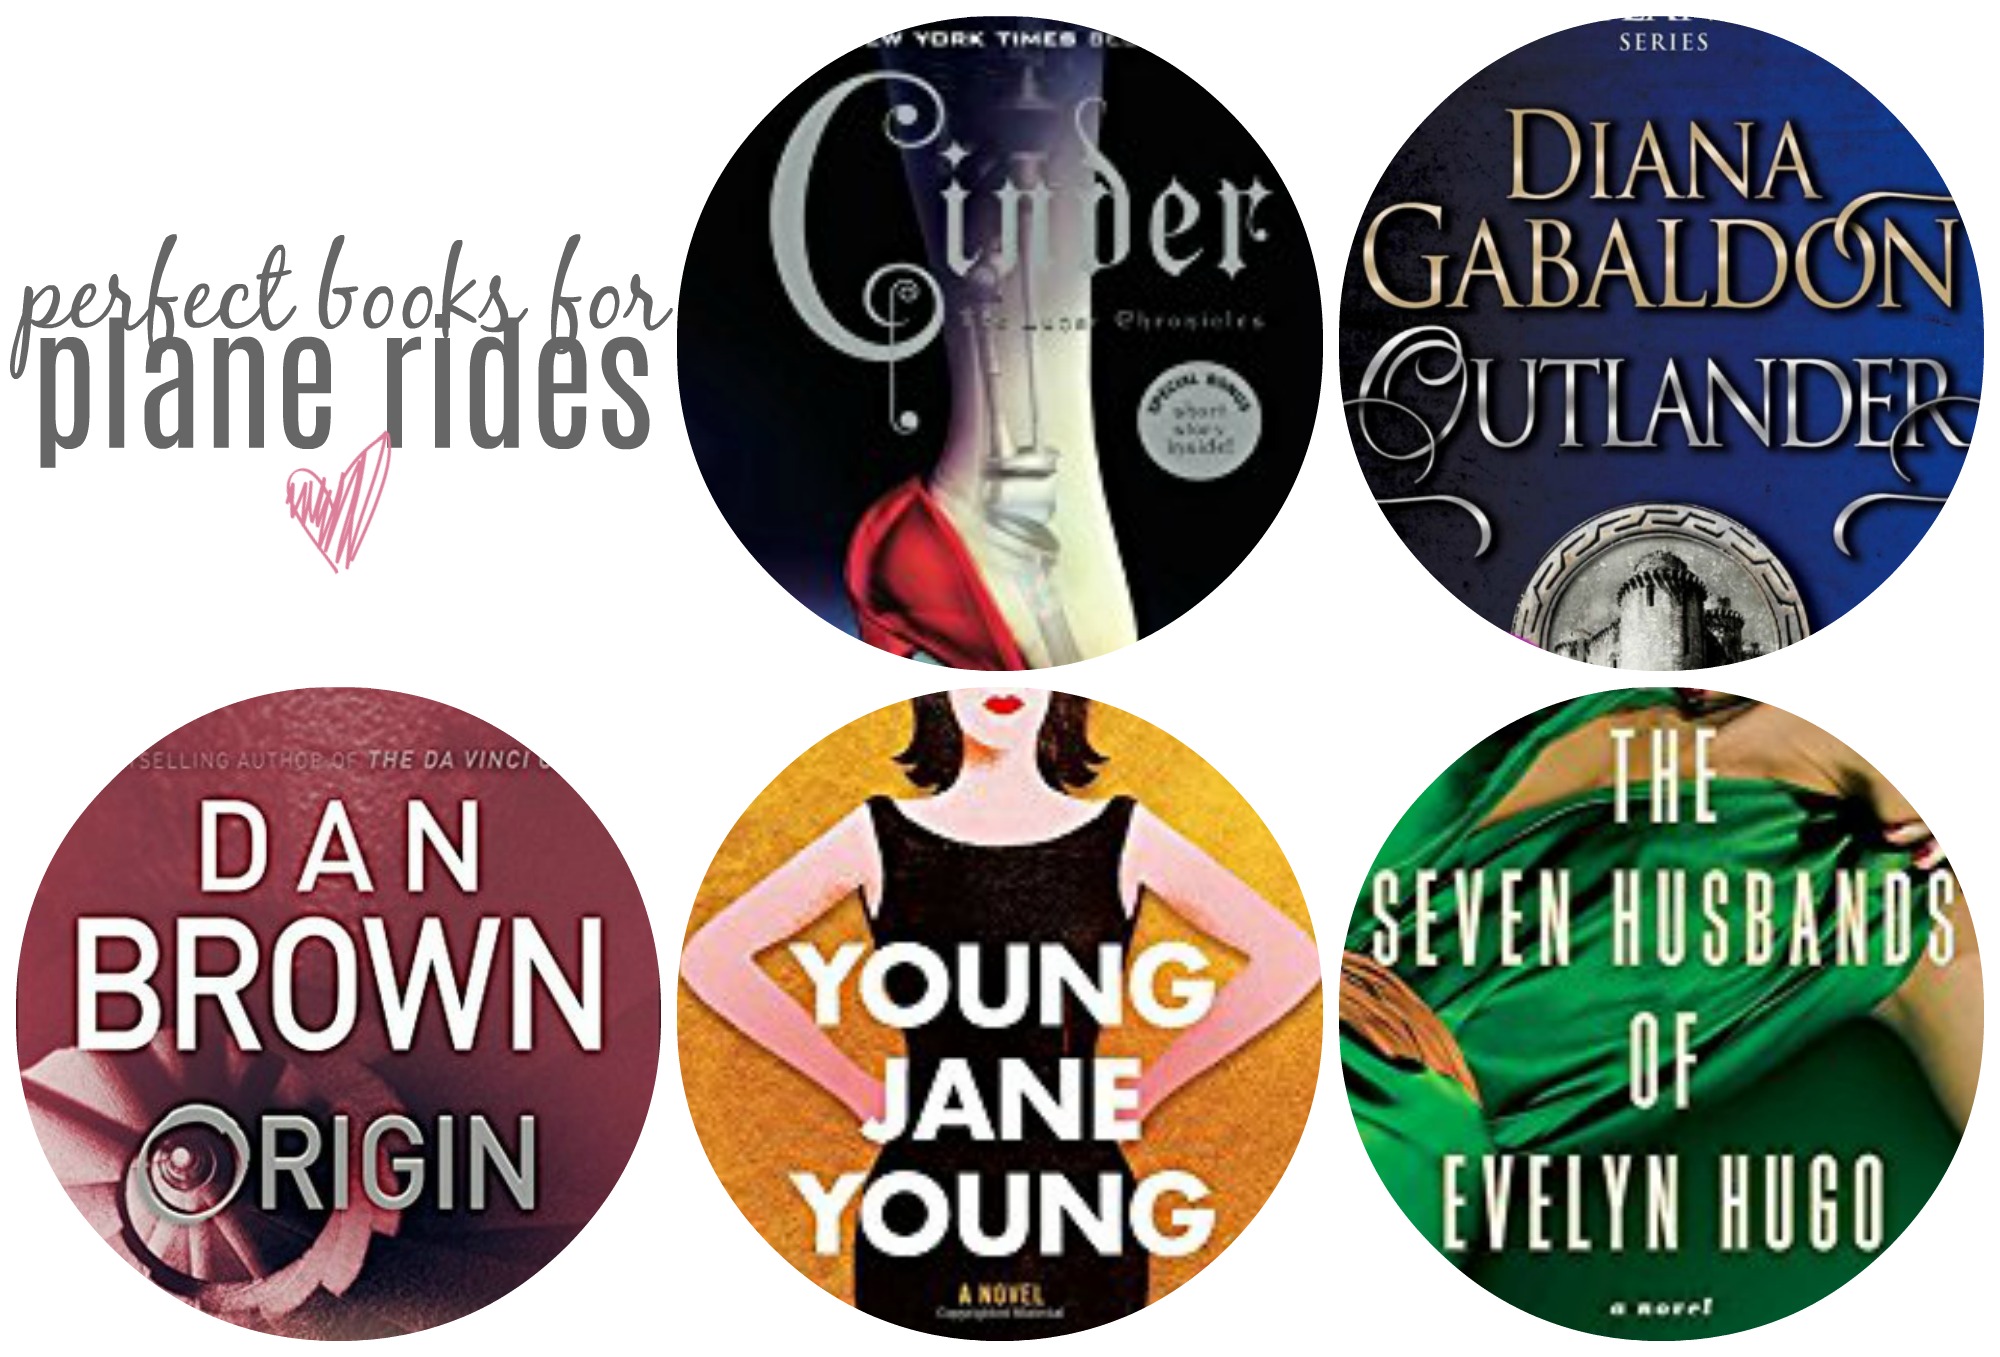 SBC: Perfect Books for Your Next Plane Ride | Something Good, perfect books for plane rides, @danaerinw , Cinder by Marissa Meyer Outlander by Diana Gabaldon Origin by Dan Brown (or Dark Matter by Blake Crouch) Young Jane Young by Gabrielle Zevin The Seven Husbands of Evelyn Hugo by Taylor Jenkins Reid